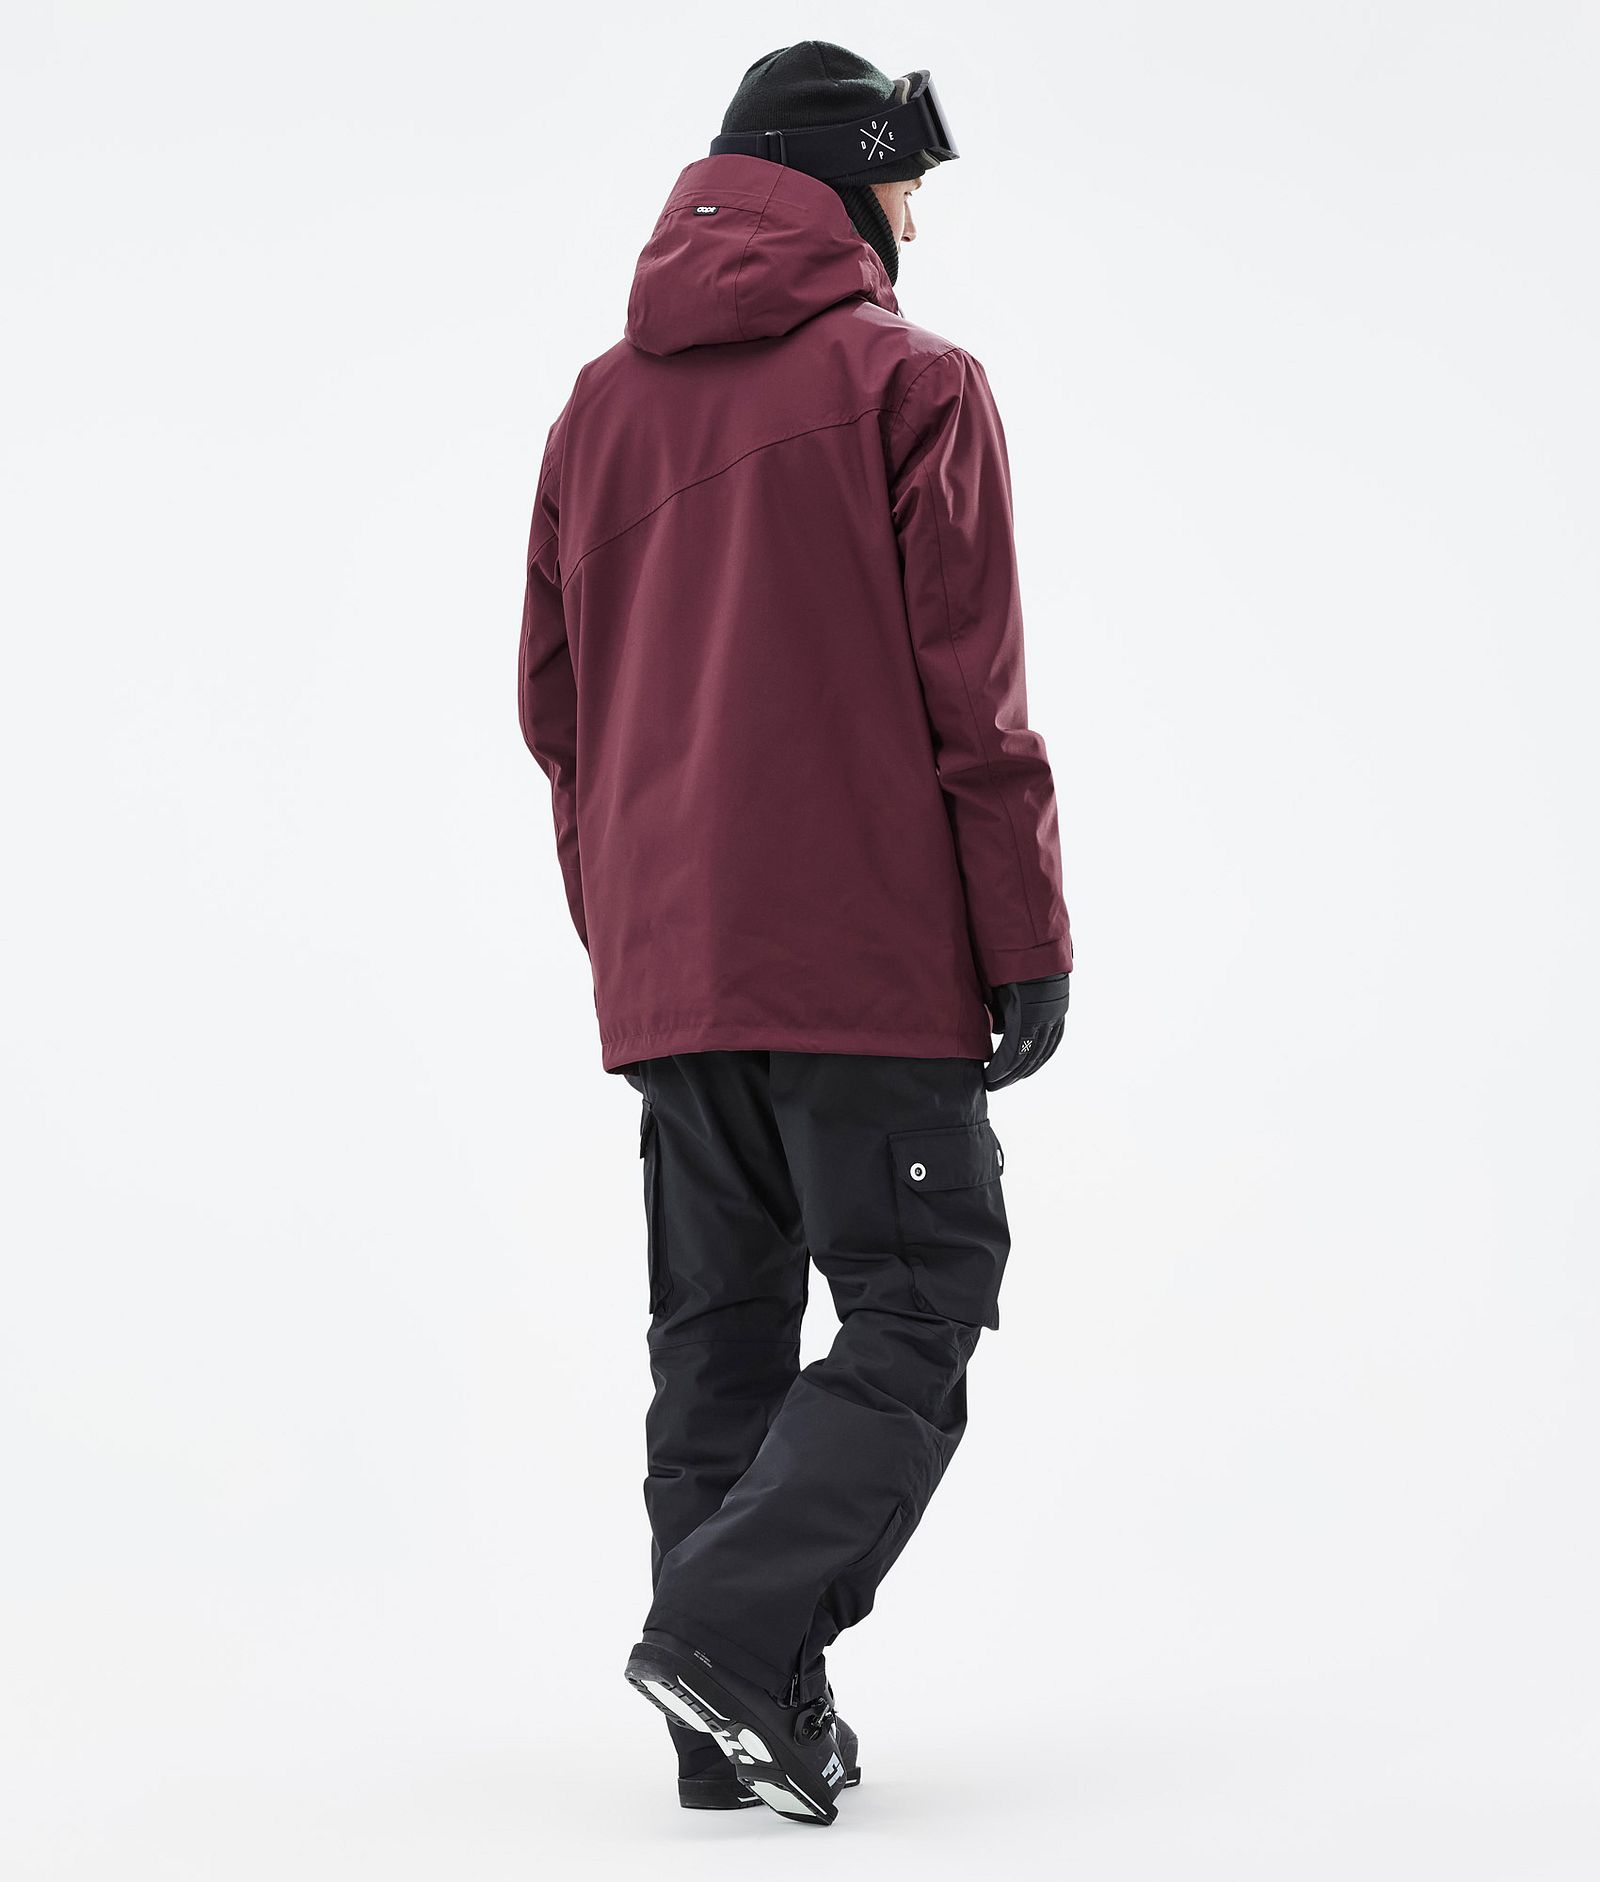 Adept Outfit Sci Uomo Burgundy/Black, Image 2 of 2